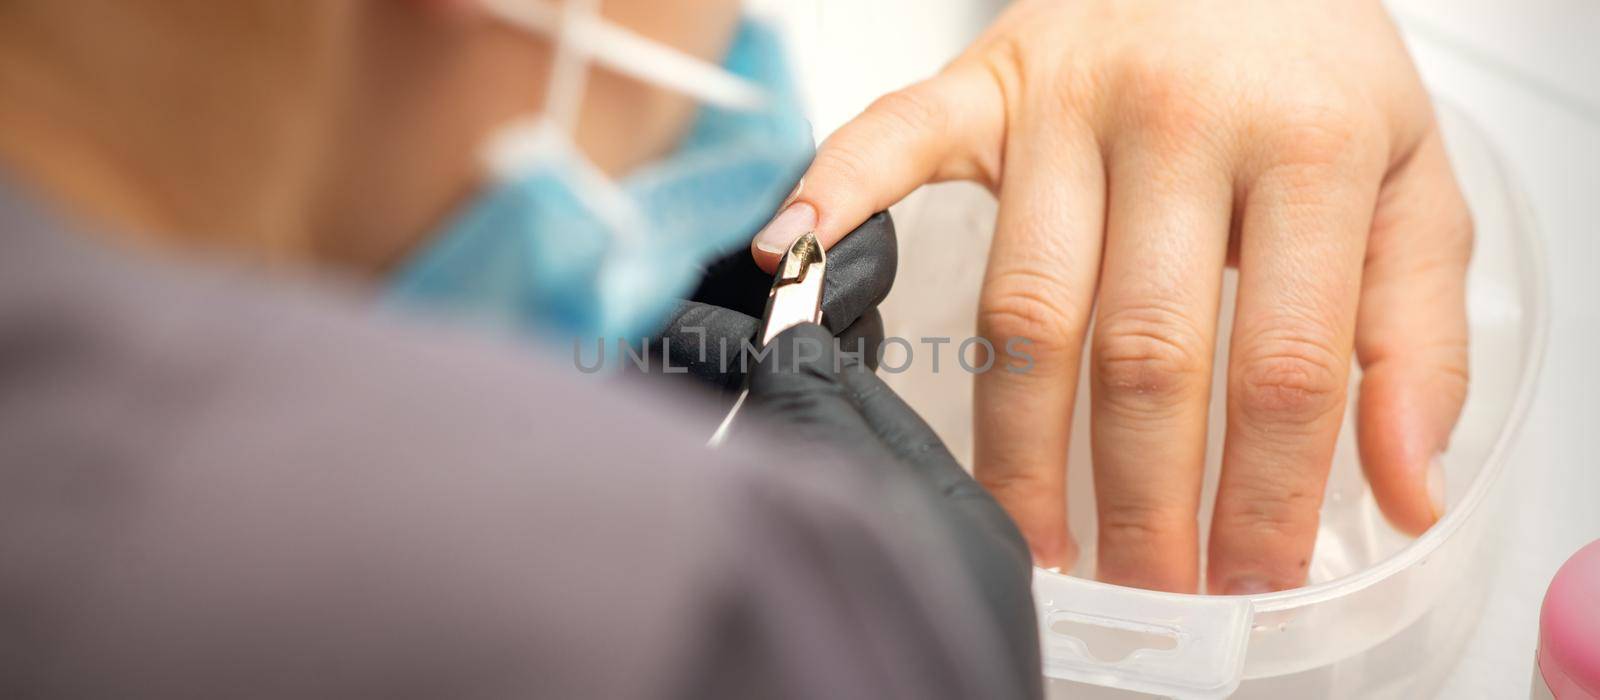 Nail master removing nails cuticle with a nipper, manicure hygiene in a beauty salon. by okskukuruza